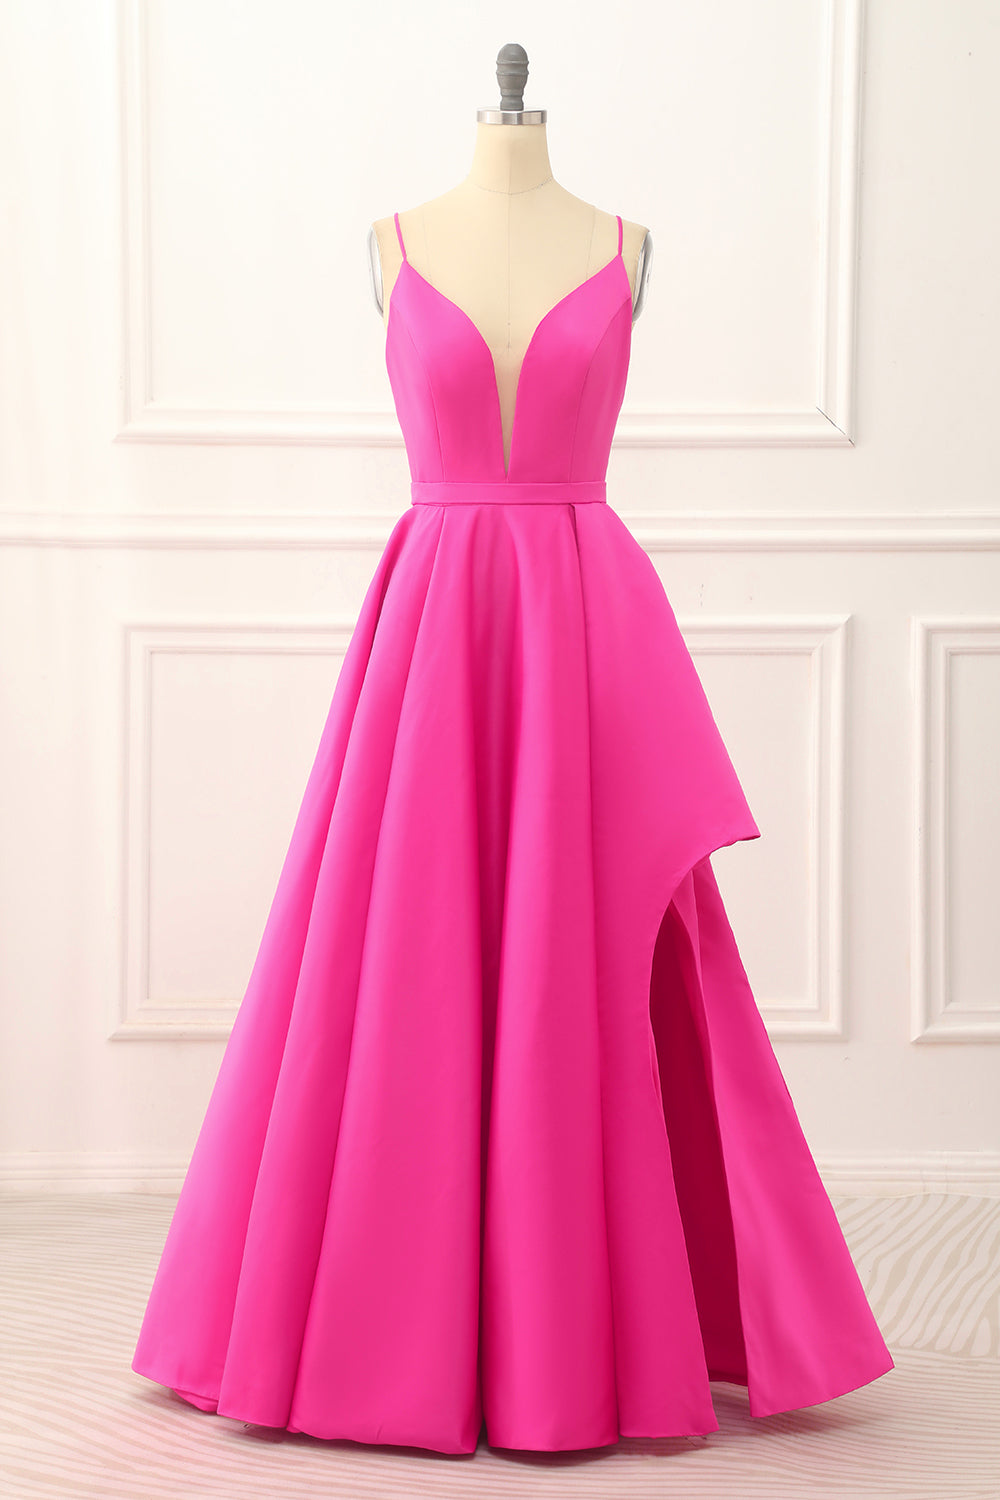 Hot Pink A Line Satin Prom Dress With Slit